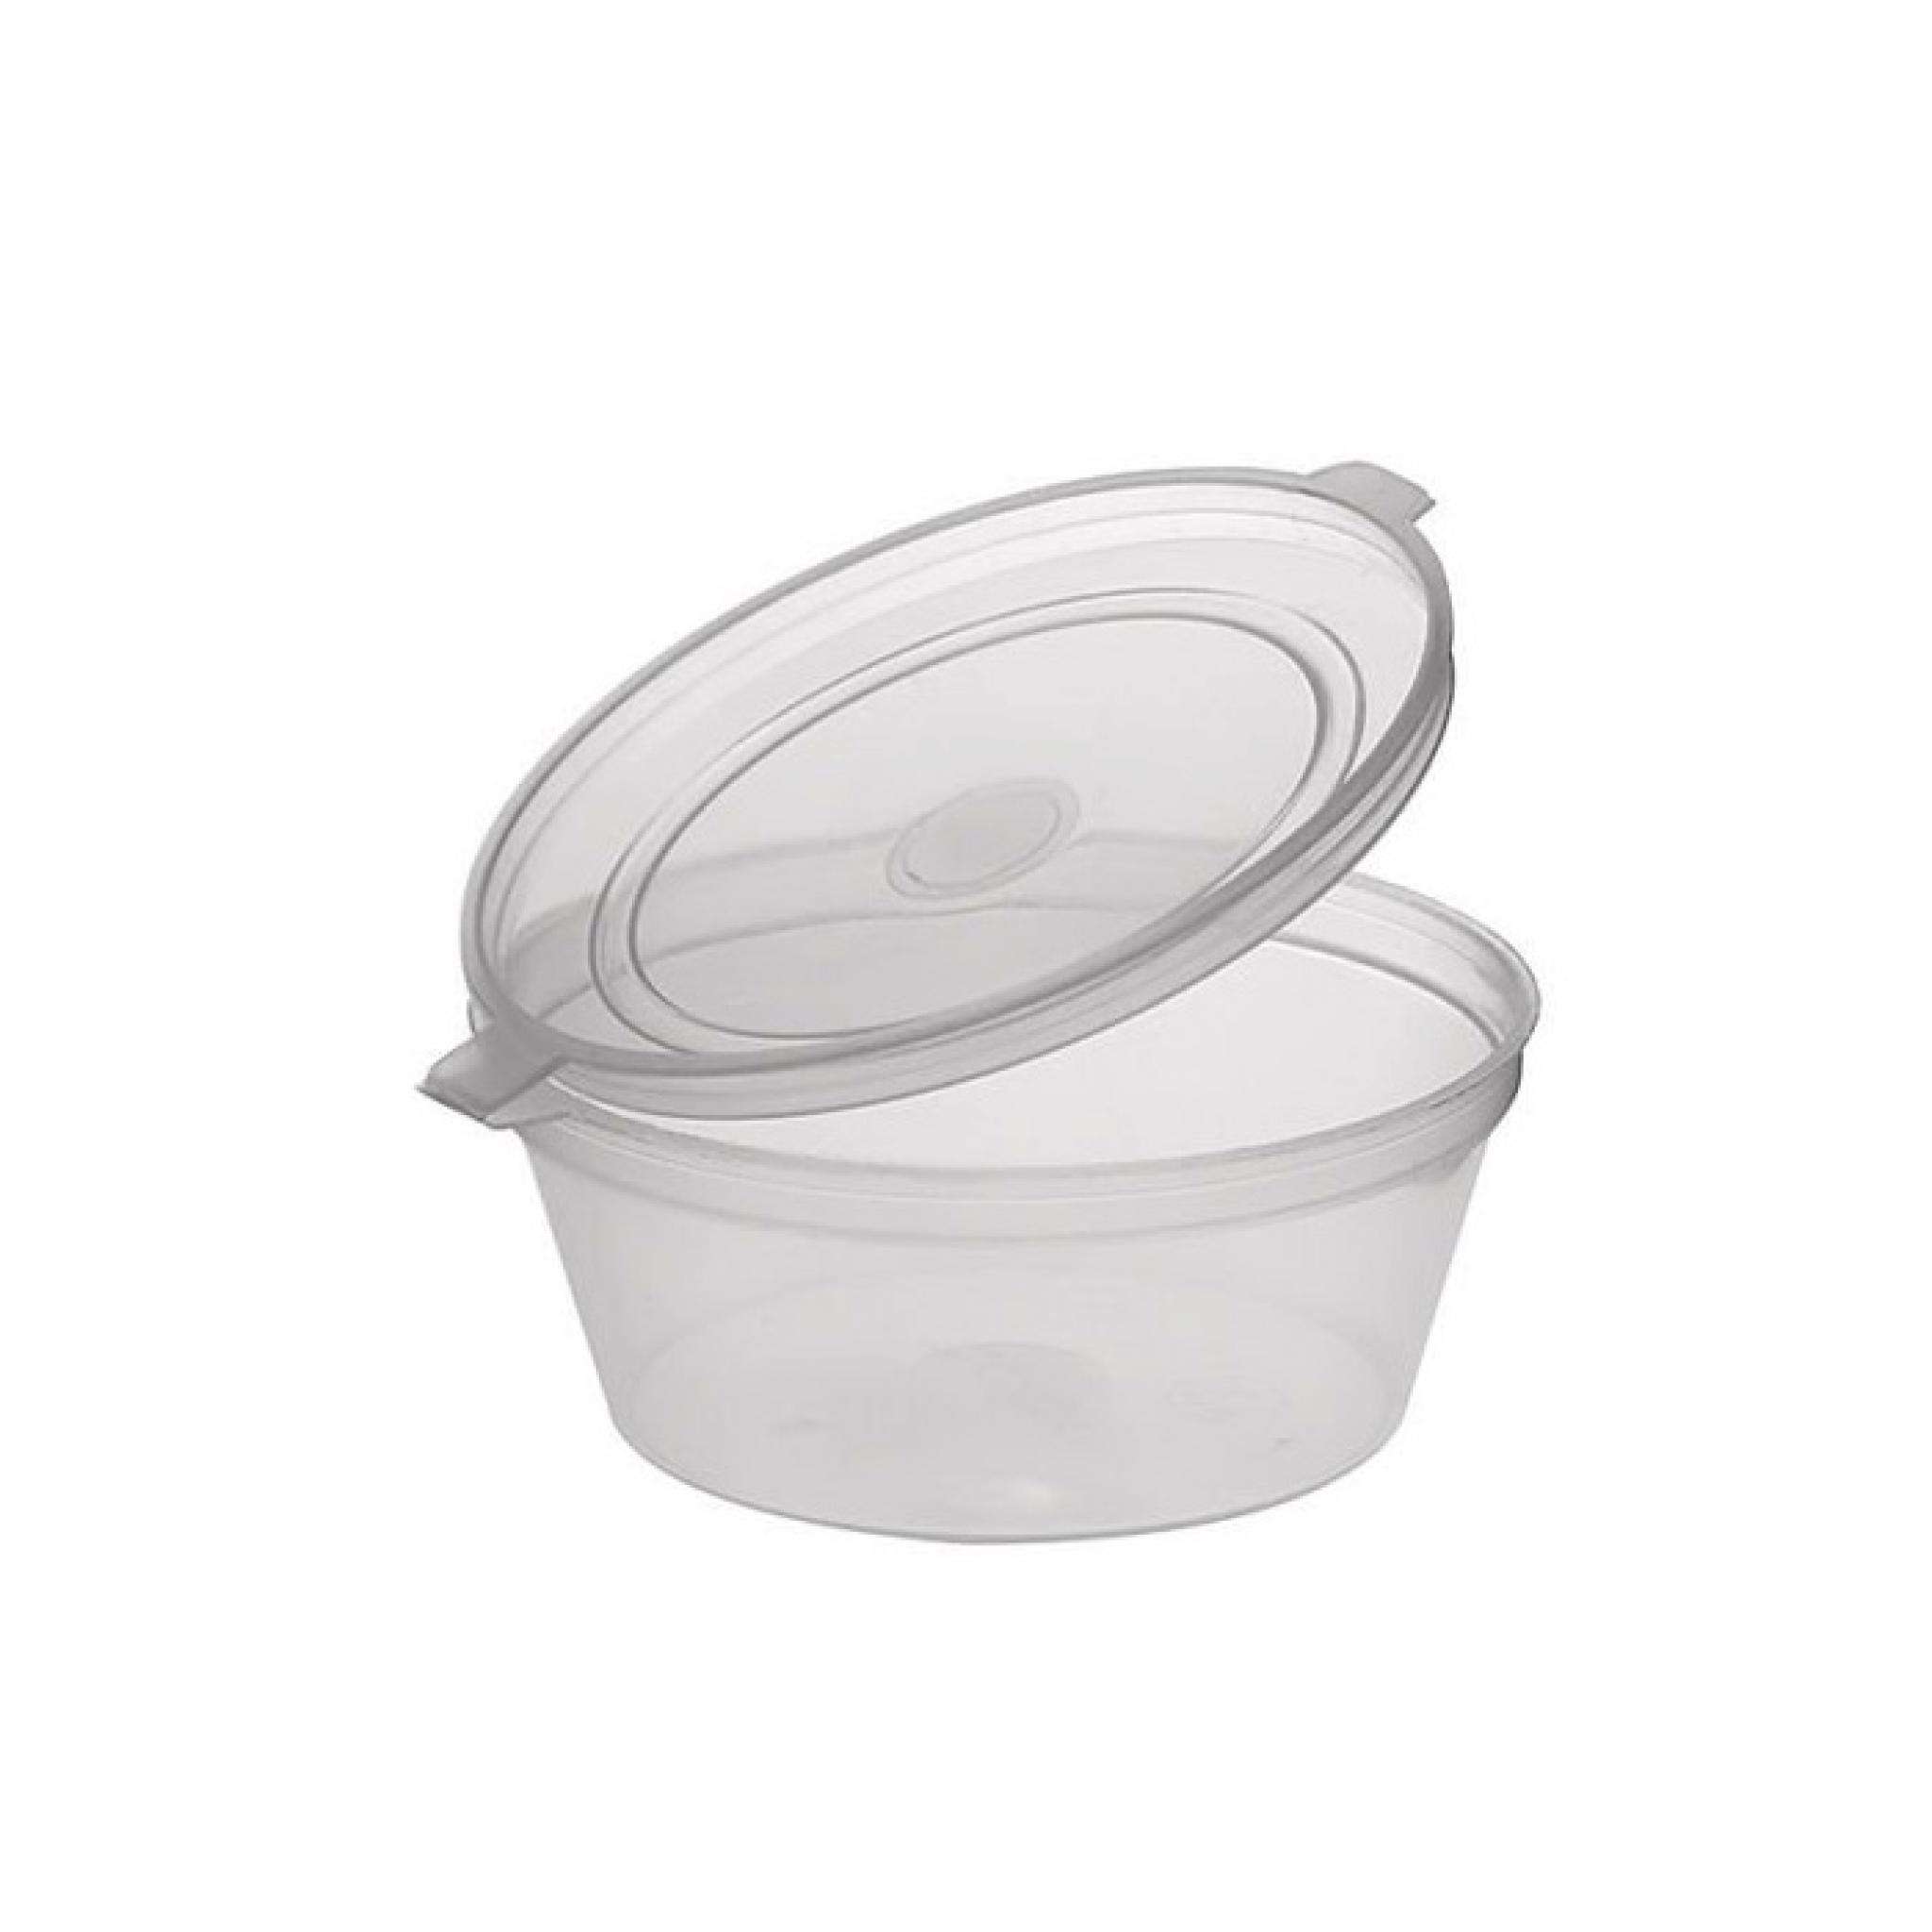 https://qualitydisposables.com.au/wp-content/uploads/2020/02/Clear_Plastic_Round_Container_With_lid.jpg